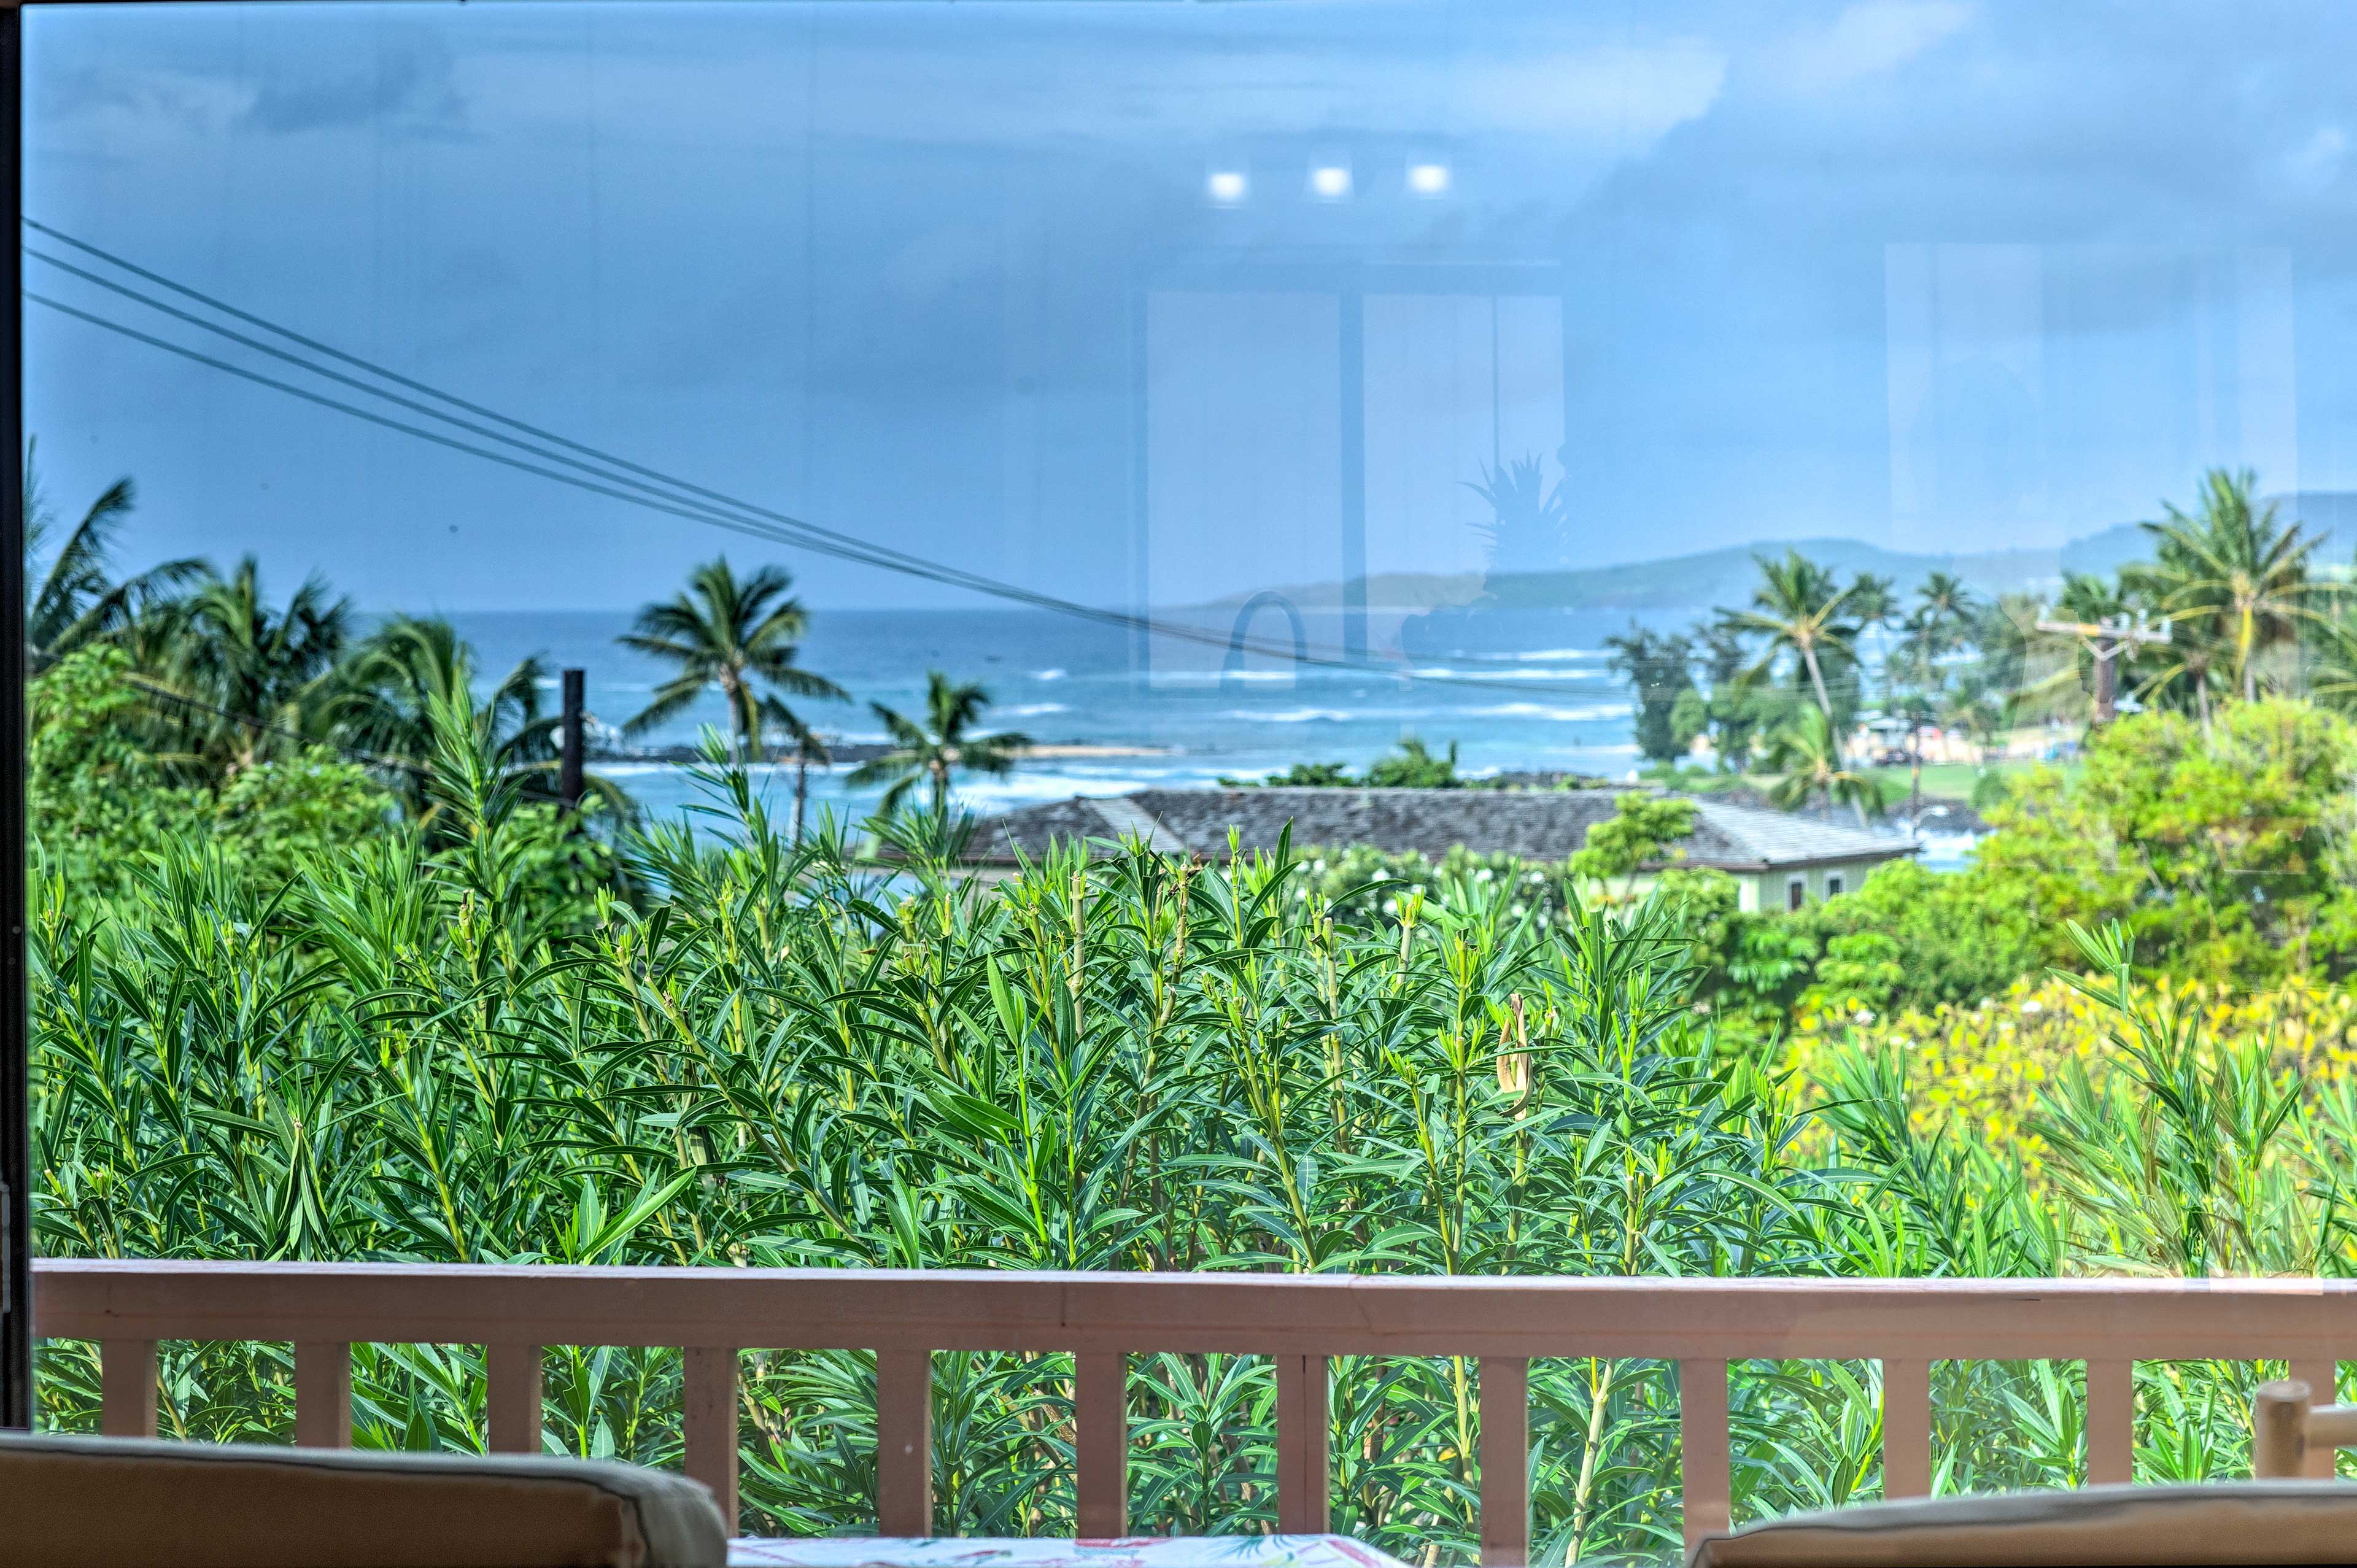 Soak up these lush views from the comfort of the vacation rental!